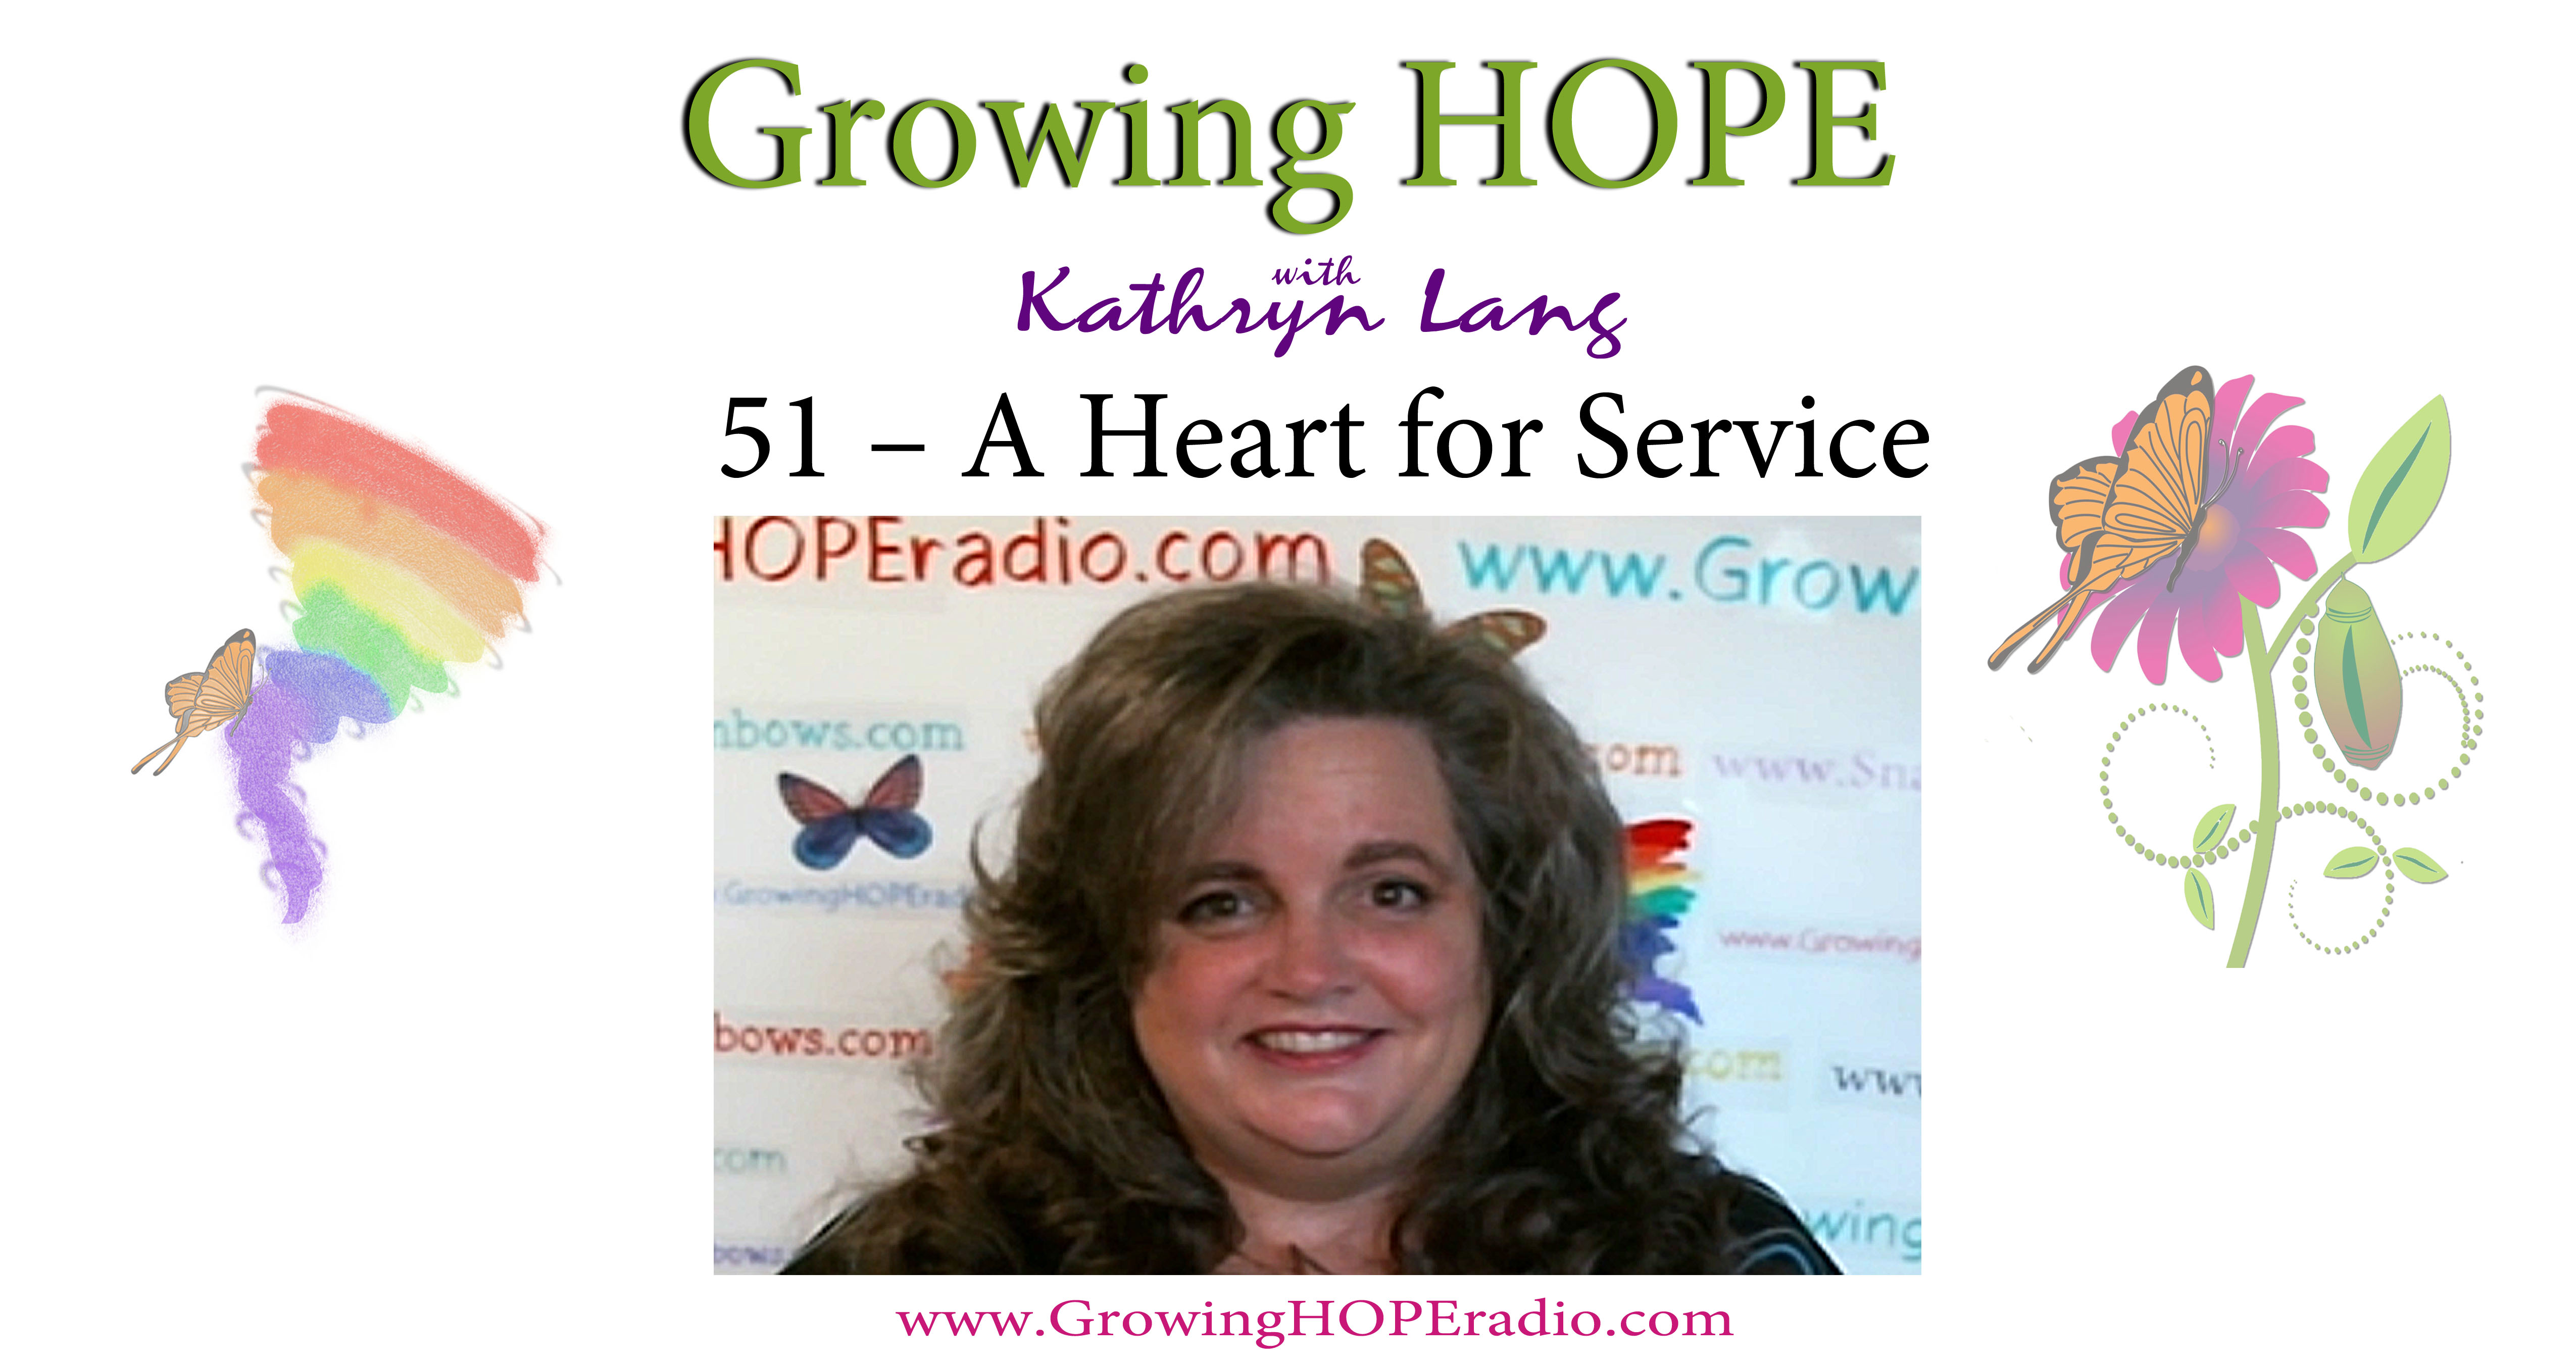 #GrowingHOPE Daily - header - 51 - heart for service